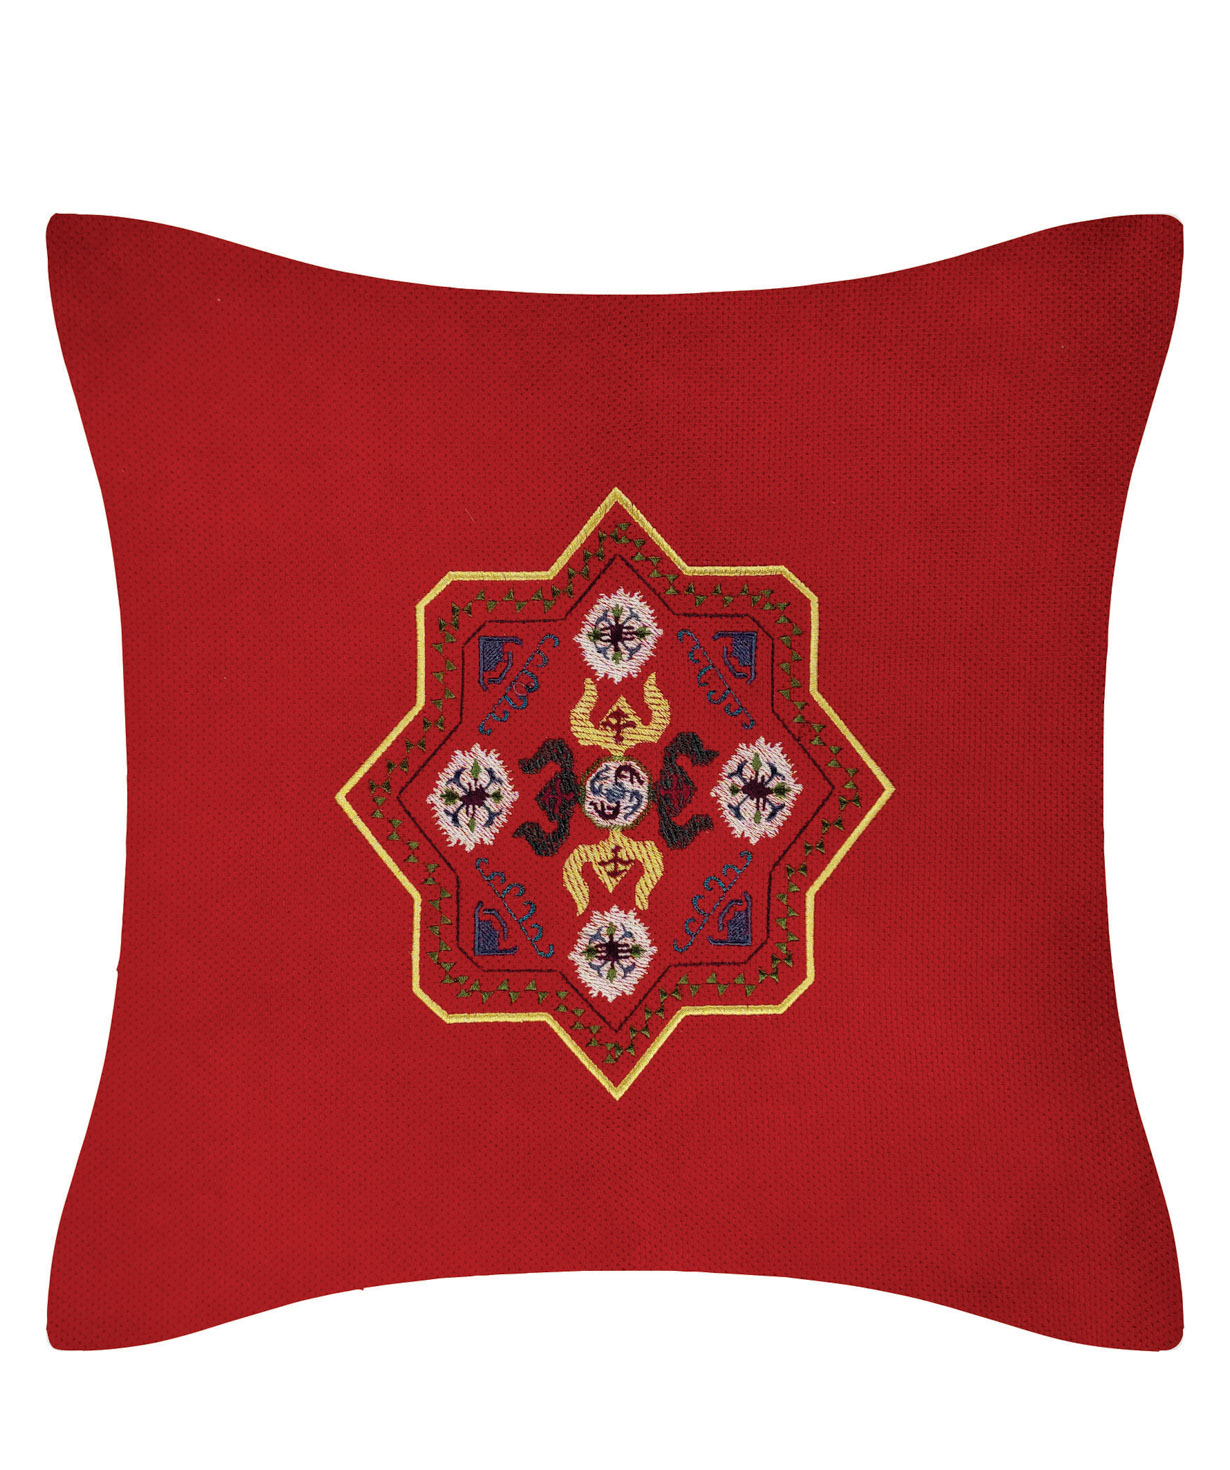 Pillow `Miskaryan heritage` embroidered with Armenian ornament №38